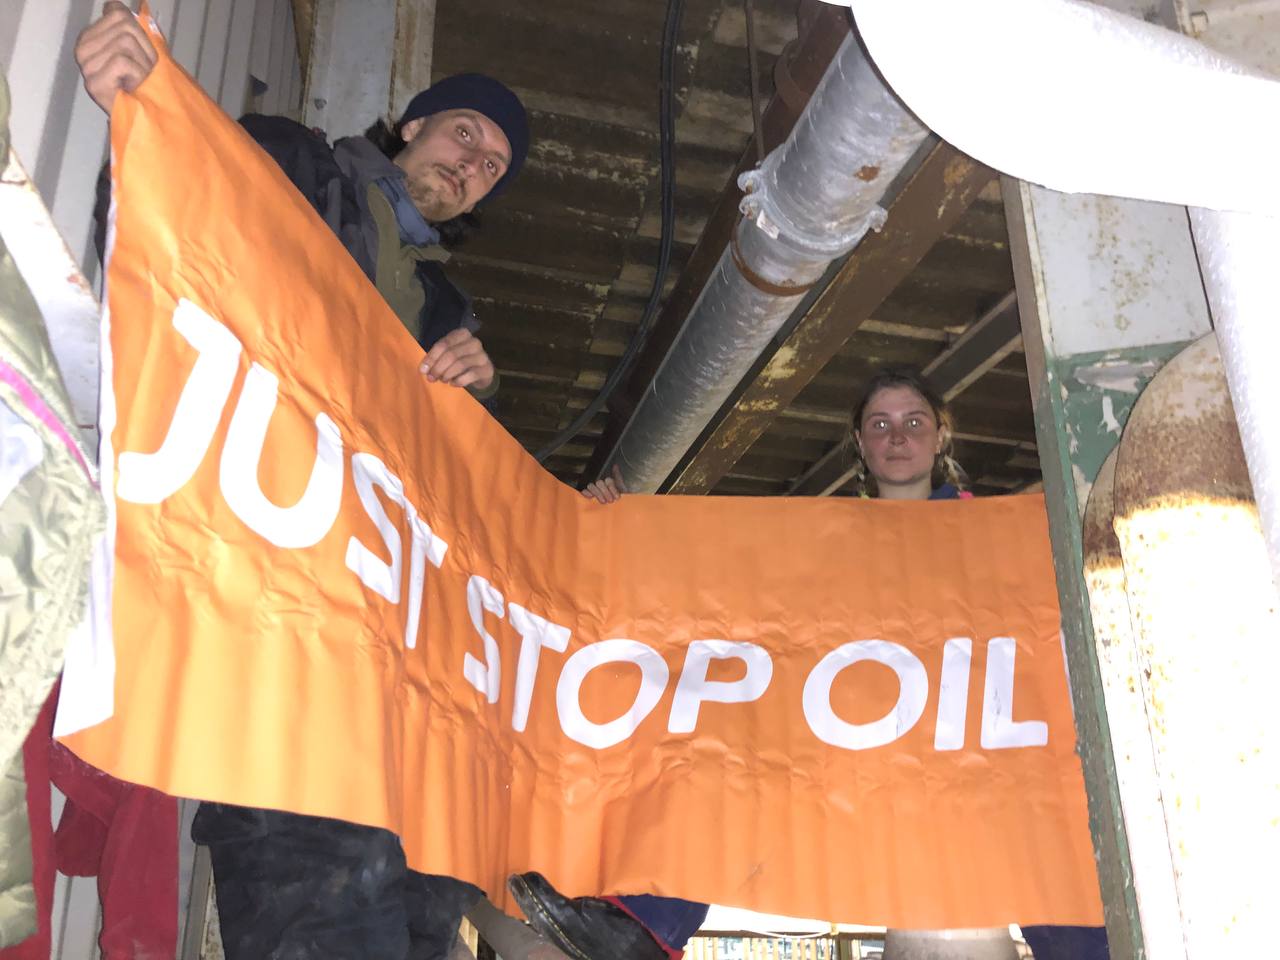 Just Stop Oil activists have climbed on top of tankers and pipes at an oil terminal in Thurrock, Essex, as they call for the government to end all new oil and gas projects